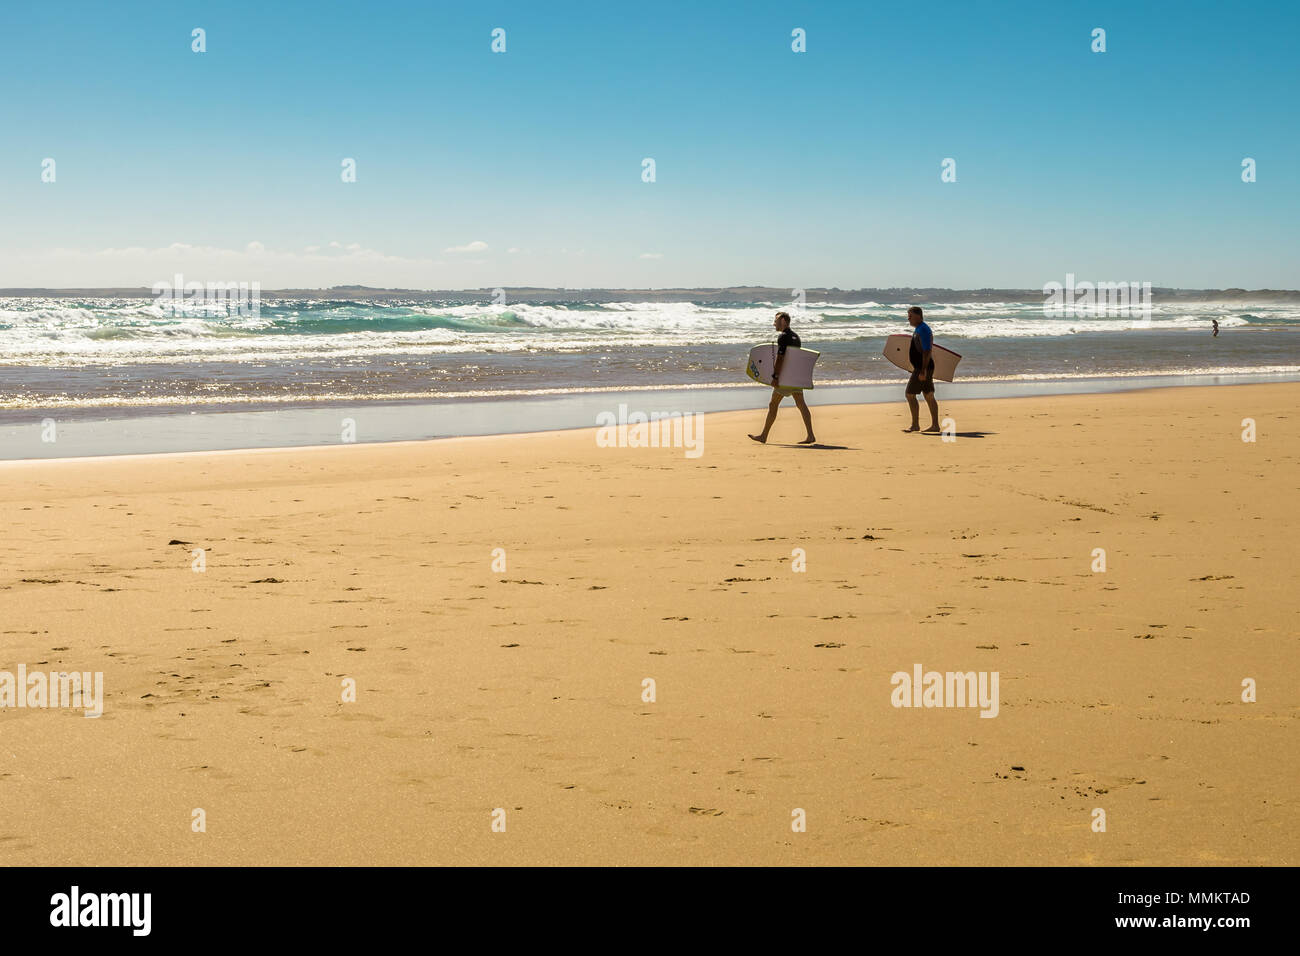 Phillip Island, Victoria, Australia - January 4, 2015: Two surfers holding surfboards at Woolamai Beach, Cape Woolamai State Faunal Reserve in summer Stock Photo